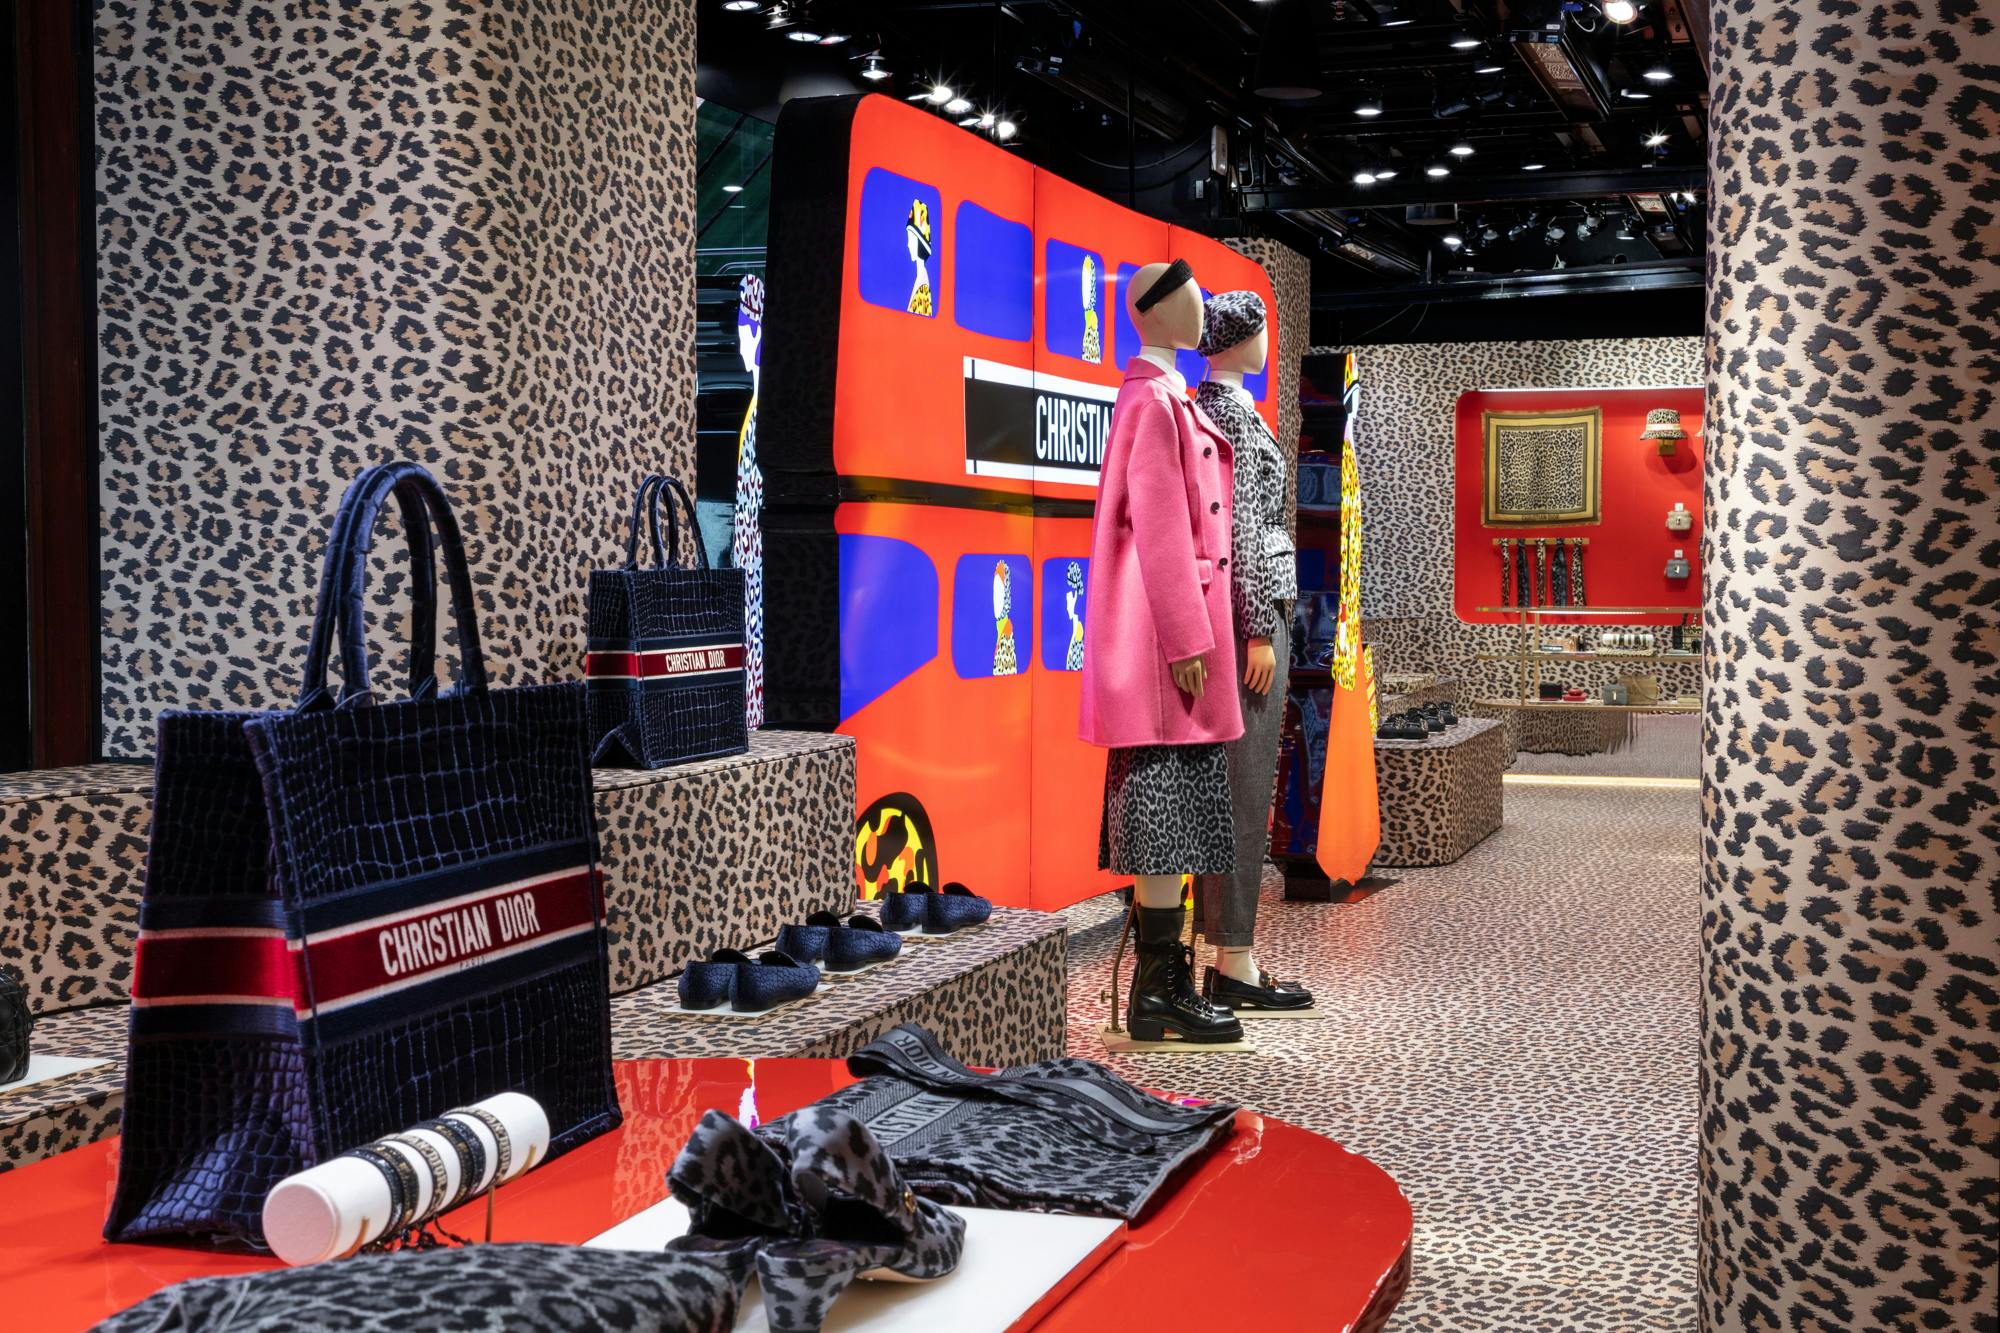 Dior presents popup store at Harrods  The Glass Magazine